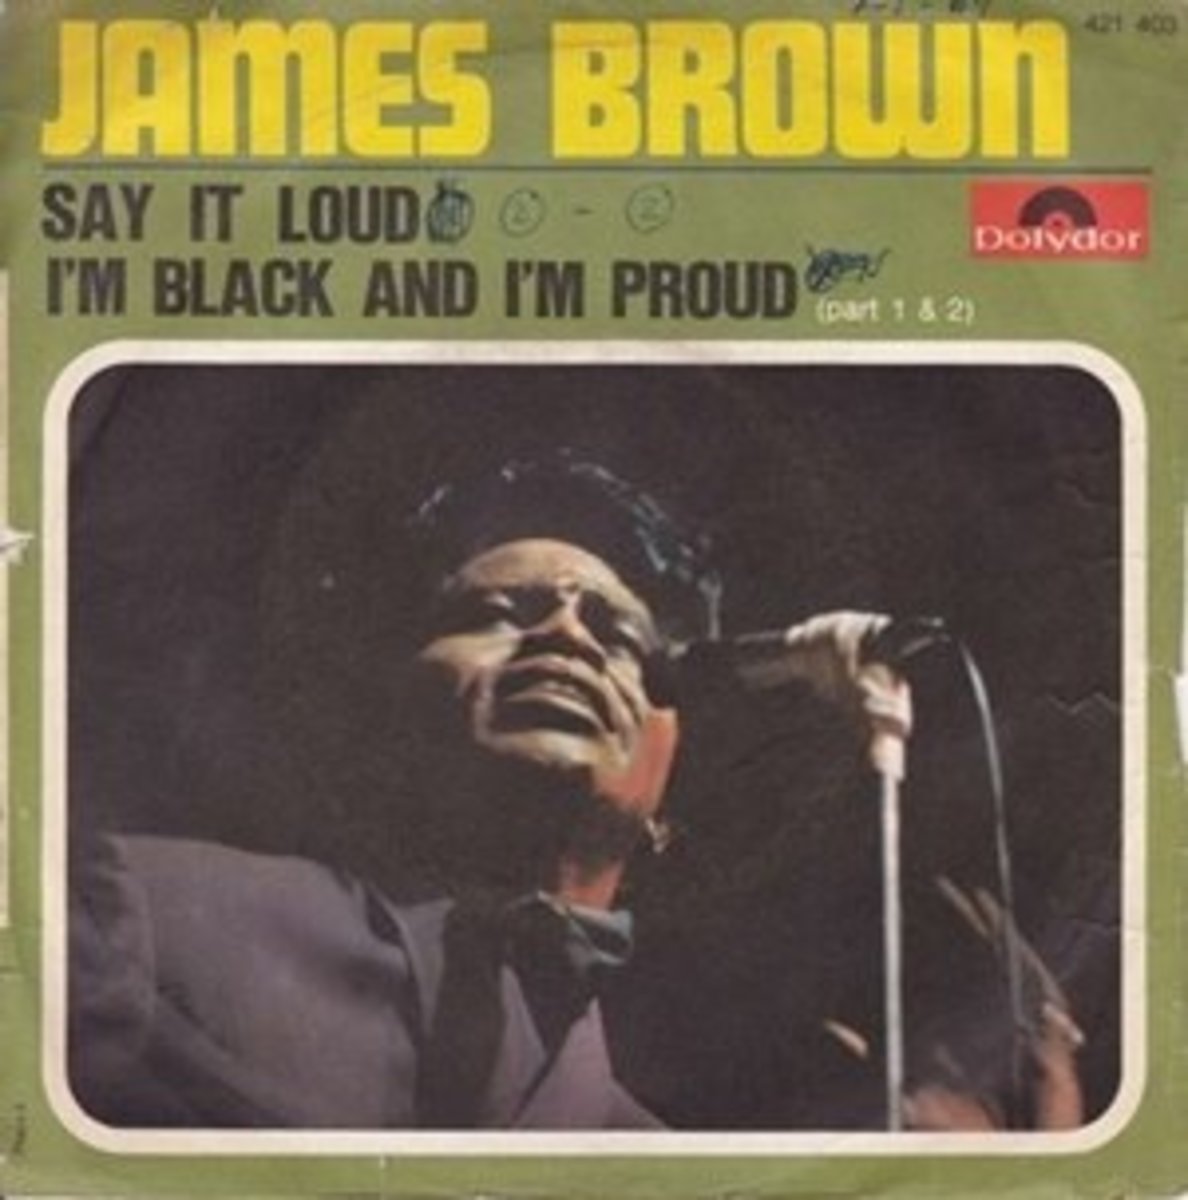 The, "Say It Loud – I'm Black and I'm Proud" album by James Brown was released in March 1969.